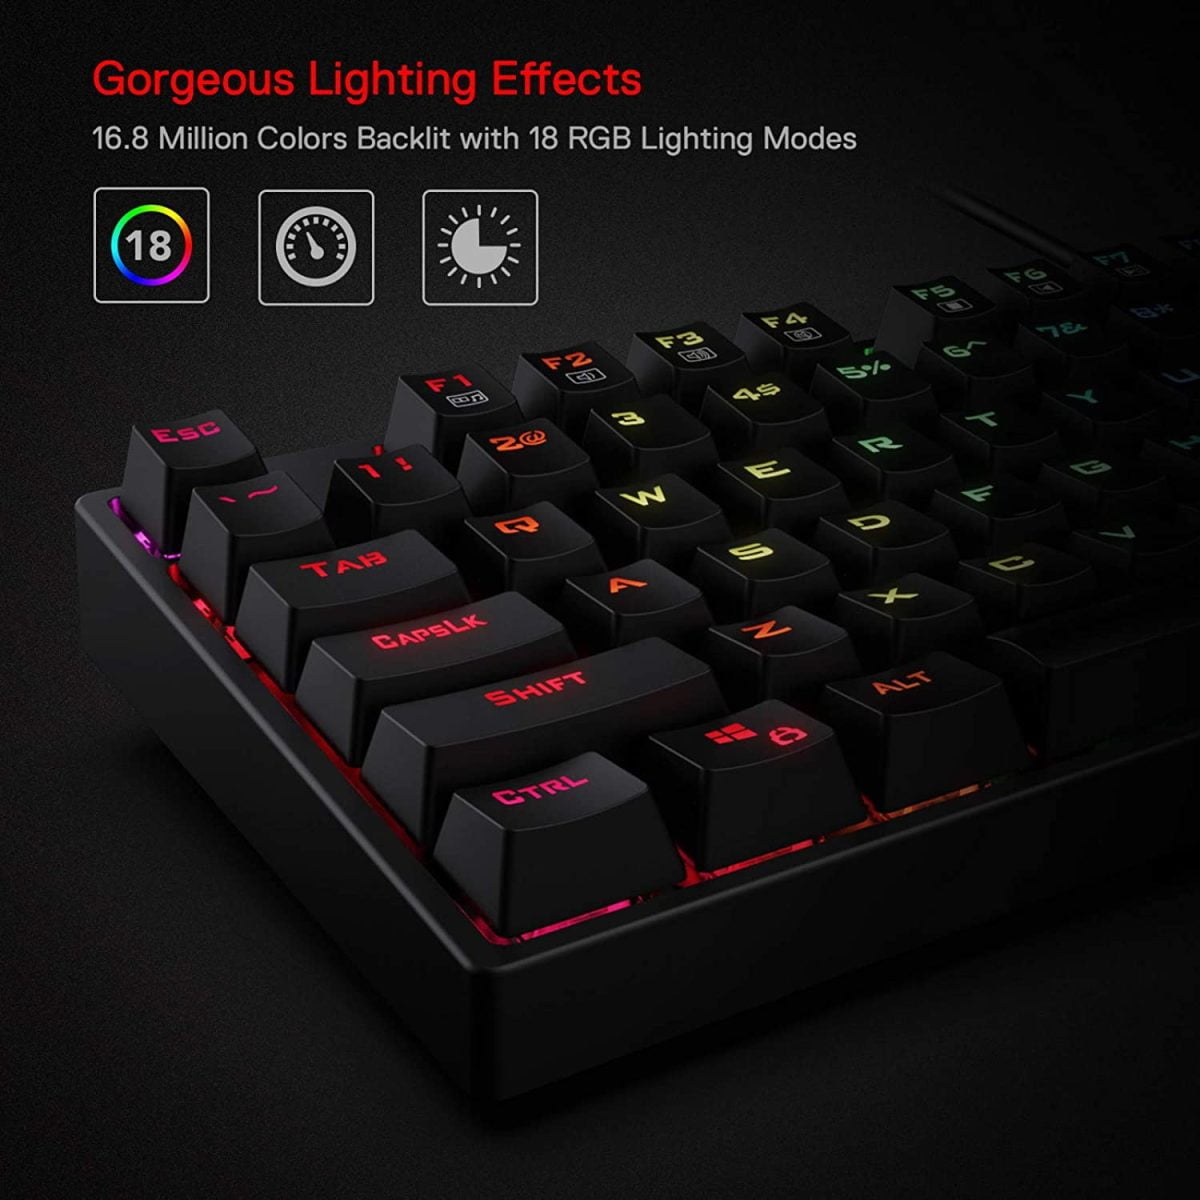 Redragon &Lt;H1 Class=&Quot;Product_Title Entry-Title&Quot;&Gt;Redragon K582 Surara Rgb Led Backlit Mechanical Gaming Keyboard&Lt;/H1&Gt; &Lt;Table Class=&Quot;A-Normal A-Spacing-Micro&Quot;&Gt; &Lt;Tbody&Gt; &Lt;Tr Class=&Quot;A-Spacing-Small Po-Keyboard_Description&Quot;&Gt; &Lt;Td Class=&Quot;A-Span3&Quot;&Gt;&Lt;Span Class=&Quot;A-Size-Base A-Text-Bold&Quot;&Gt;Keyboard Description&Lt;/Span&Gt;&Lt;/Td&Gt; &Lt;Td Class=&Quot;A-Span9&Quot;&Gt;&Lt;Span Class=&Quot;A-Size-Base&Quot;&Gt;Basic 104 Keys Wired Gaming Keyboard&Lt;/Span&Gt;&Lt;/Td&Gt; &Lt;/Tr&Gt; &Lt;Tr Class=&Quot;A-Spacing-Small Po-Connectivity_Technology&Quot;&Gt; &Lt;Td Class=&Quot;A-Span3&Quot;&Gt;&Lt;Span Class=&Quot;A-Size-Base A-Text-Bold&Quot;&Gt;Connectivity Technology&Lt;/Span&Gt;&Lt;/Td&Gt; &Lt;Td Class=&Quot;A-Span9&Quot;&Gt;&Lt;Span Class=&Quot;A-Size-Base&Quot;&Gt;Usb&Lt;/Span&Gt;&Lt;/Td&Gt; &Lt;/Tr&Gt; &Lt;Tr Class=&Quot;A-Spacing-Small Po-Special_Feature&Quot;&Gt; &Lt;Td Class=&Quot;A-Span3&Quot;&Gt;&Lt;Span Class=&Quot;A-Size-Base A-Text-Bold&Quot;&Gt;Special Features&Lt;/Span&Gt;&Lt;/Td&Gt; &Lt;Td Class=&Quot;A-Span9&Quot;&Gt;&Lt;Span Class=&Quot;A-Size-Base&Quot;&Gt;Lighting&Lt;/Span&Gt;&Lt;/Td&Gt; &Lt;/Tr&Gt; &Lt;Tr Class=&Quot;A-Spacing-Small Po-Compatible_Devices&Quot;&Gt; &Lt;Td Class=&Quot;A-Span3&Quot;&Gt;&Lt;Span Class=&Quot;A-Size-Base A-Text-Bold&Quot;&Gt;Compatible Devices&Lt;/Span&Gt;&Lt;/Td&Gt; &Lt;Td Class=&Quot;A-Span9&Quot;&Gt;&Lt;Span Class=&Quot;A-Size-Base&Quot;&Gt;Gaming Console&Lt;/Span&Gt;&Lt;/Td&Gt; &Lt;/Tr&Gt; &Lt;Tr Class=&Quot;A-Spacing-Small Po-Brand&Quot;&Gt; &Lt;Td Class=&Quot;A-Span3&Quot;&Gt;&Lt;Span Class=&Quot;A-Size-Base A-Text-Bold&Quot;&Gt;Brand&Lt;/Span&Gt;&Lt;/Td&Gt; &Lt;Td Class=&Quot;A-Span9&Quot;&Gt;&Lt;Span Class=&Quot;A-Size-Base&Quot;&Gt;Redragon&Lt;/Span&Gt;&Lt;/Td&Gt; &Lt;/Tr&Gt; &Lt;/Tbody&Gt; &Lt;/Table&Gt; Gaming Keyboard Redragon K582 Gaming Keyboard